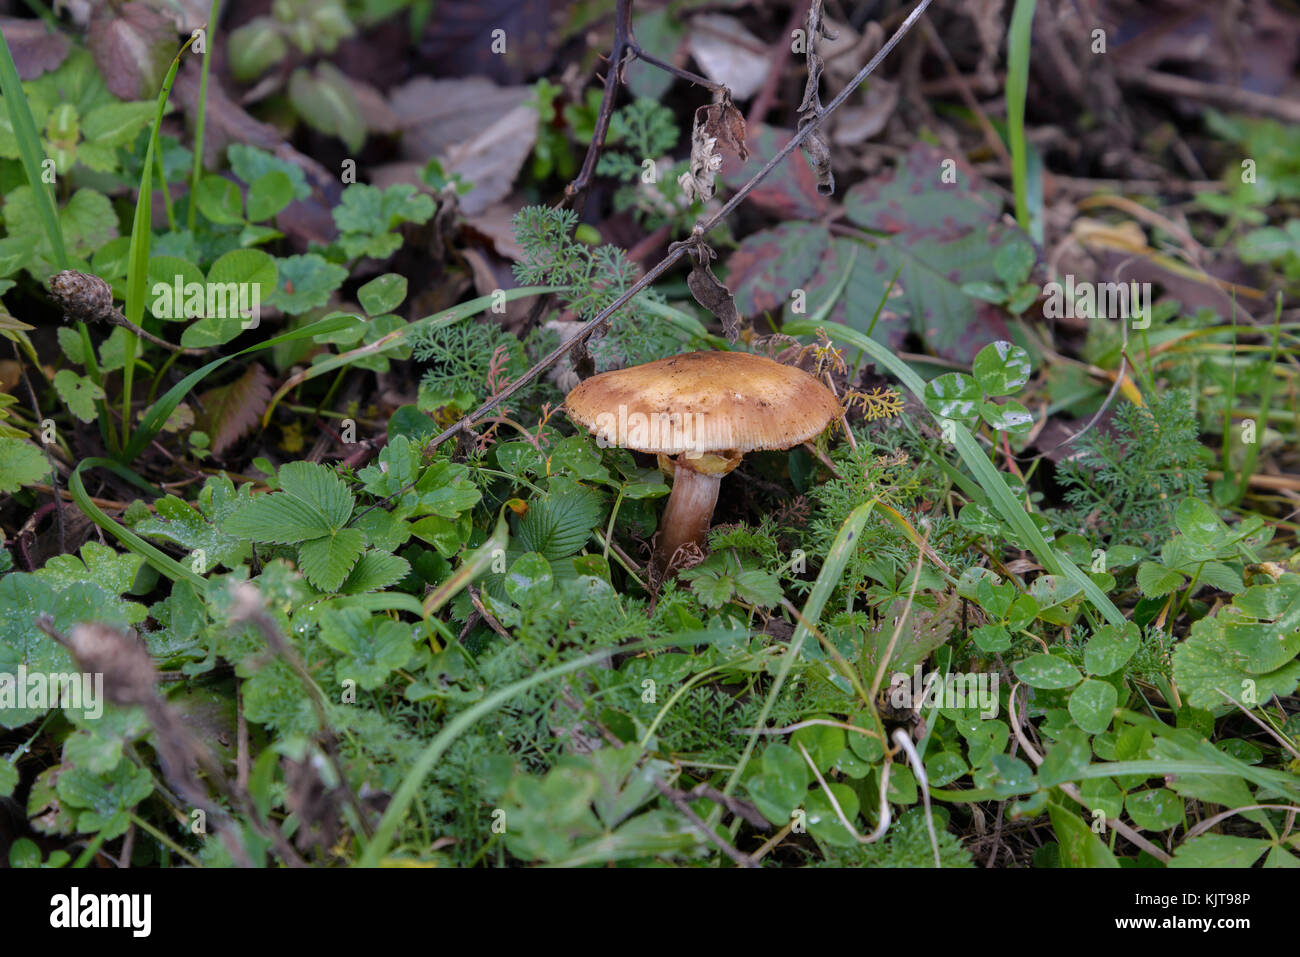 The fungus Armillaria photographed in the green grass Stock Photo